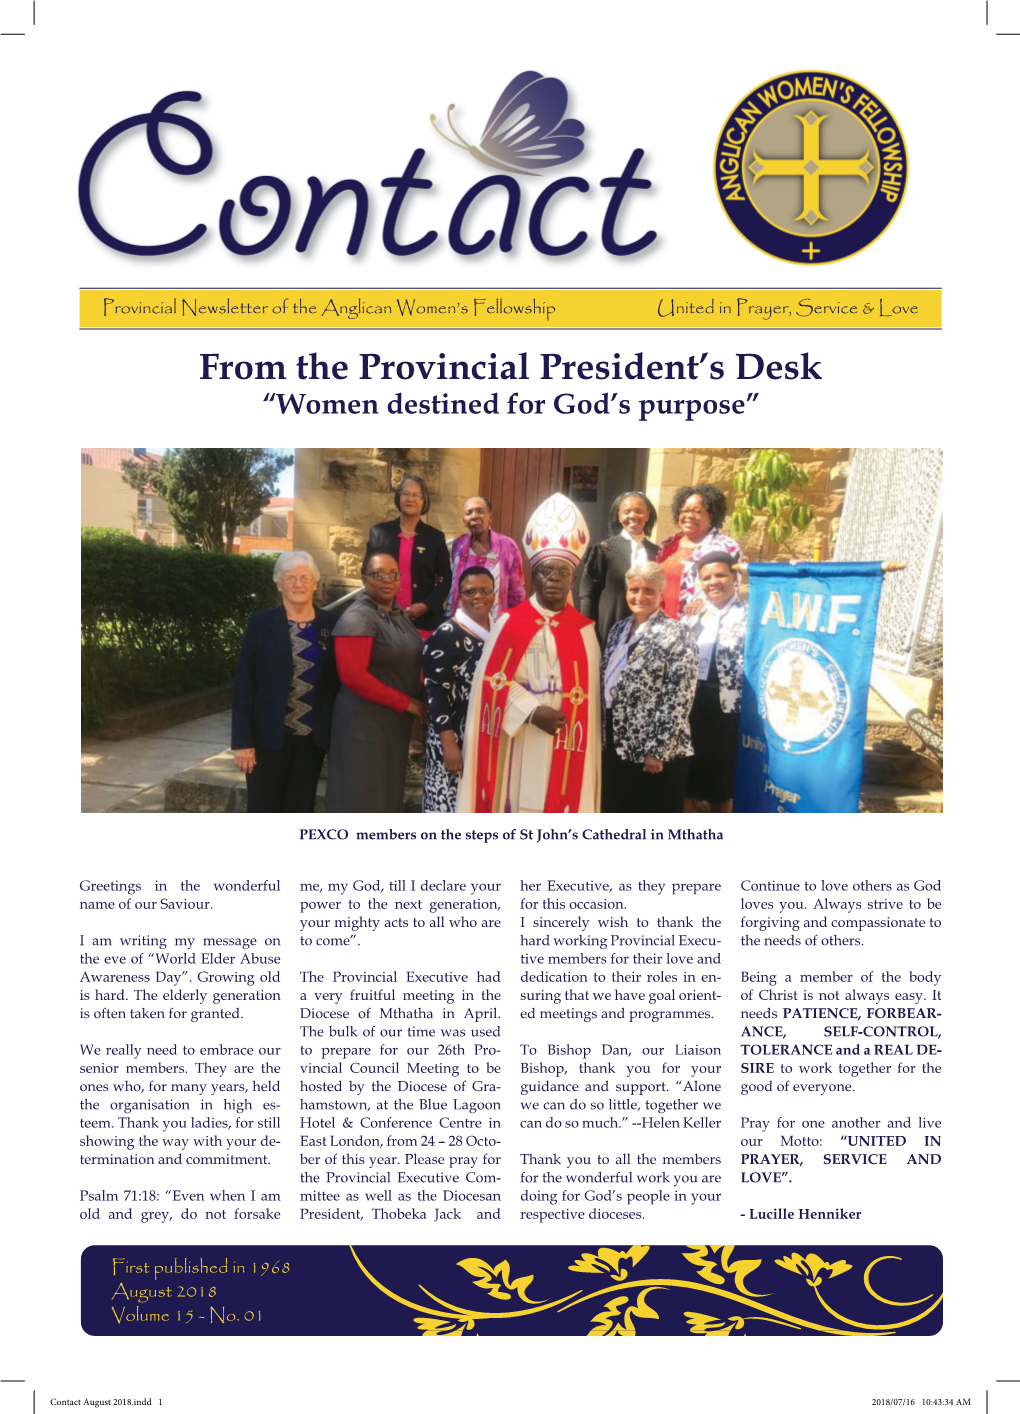 From the Provincial President's Desk